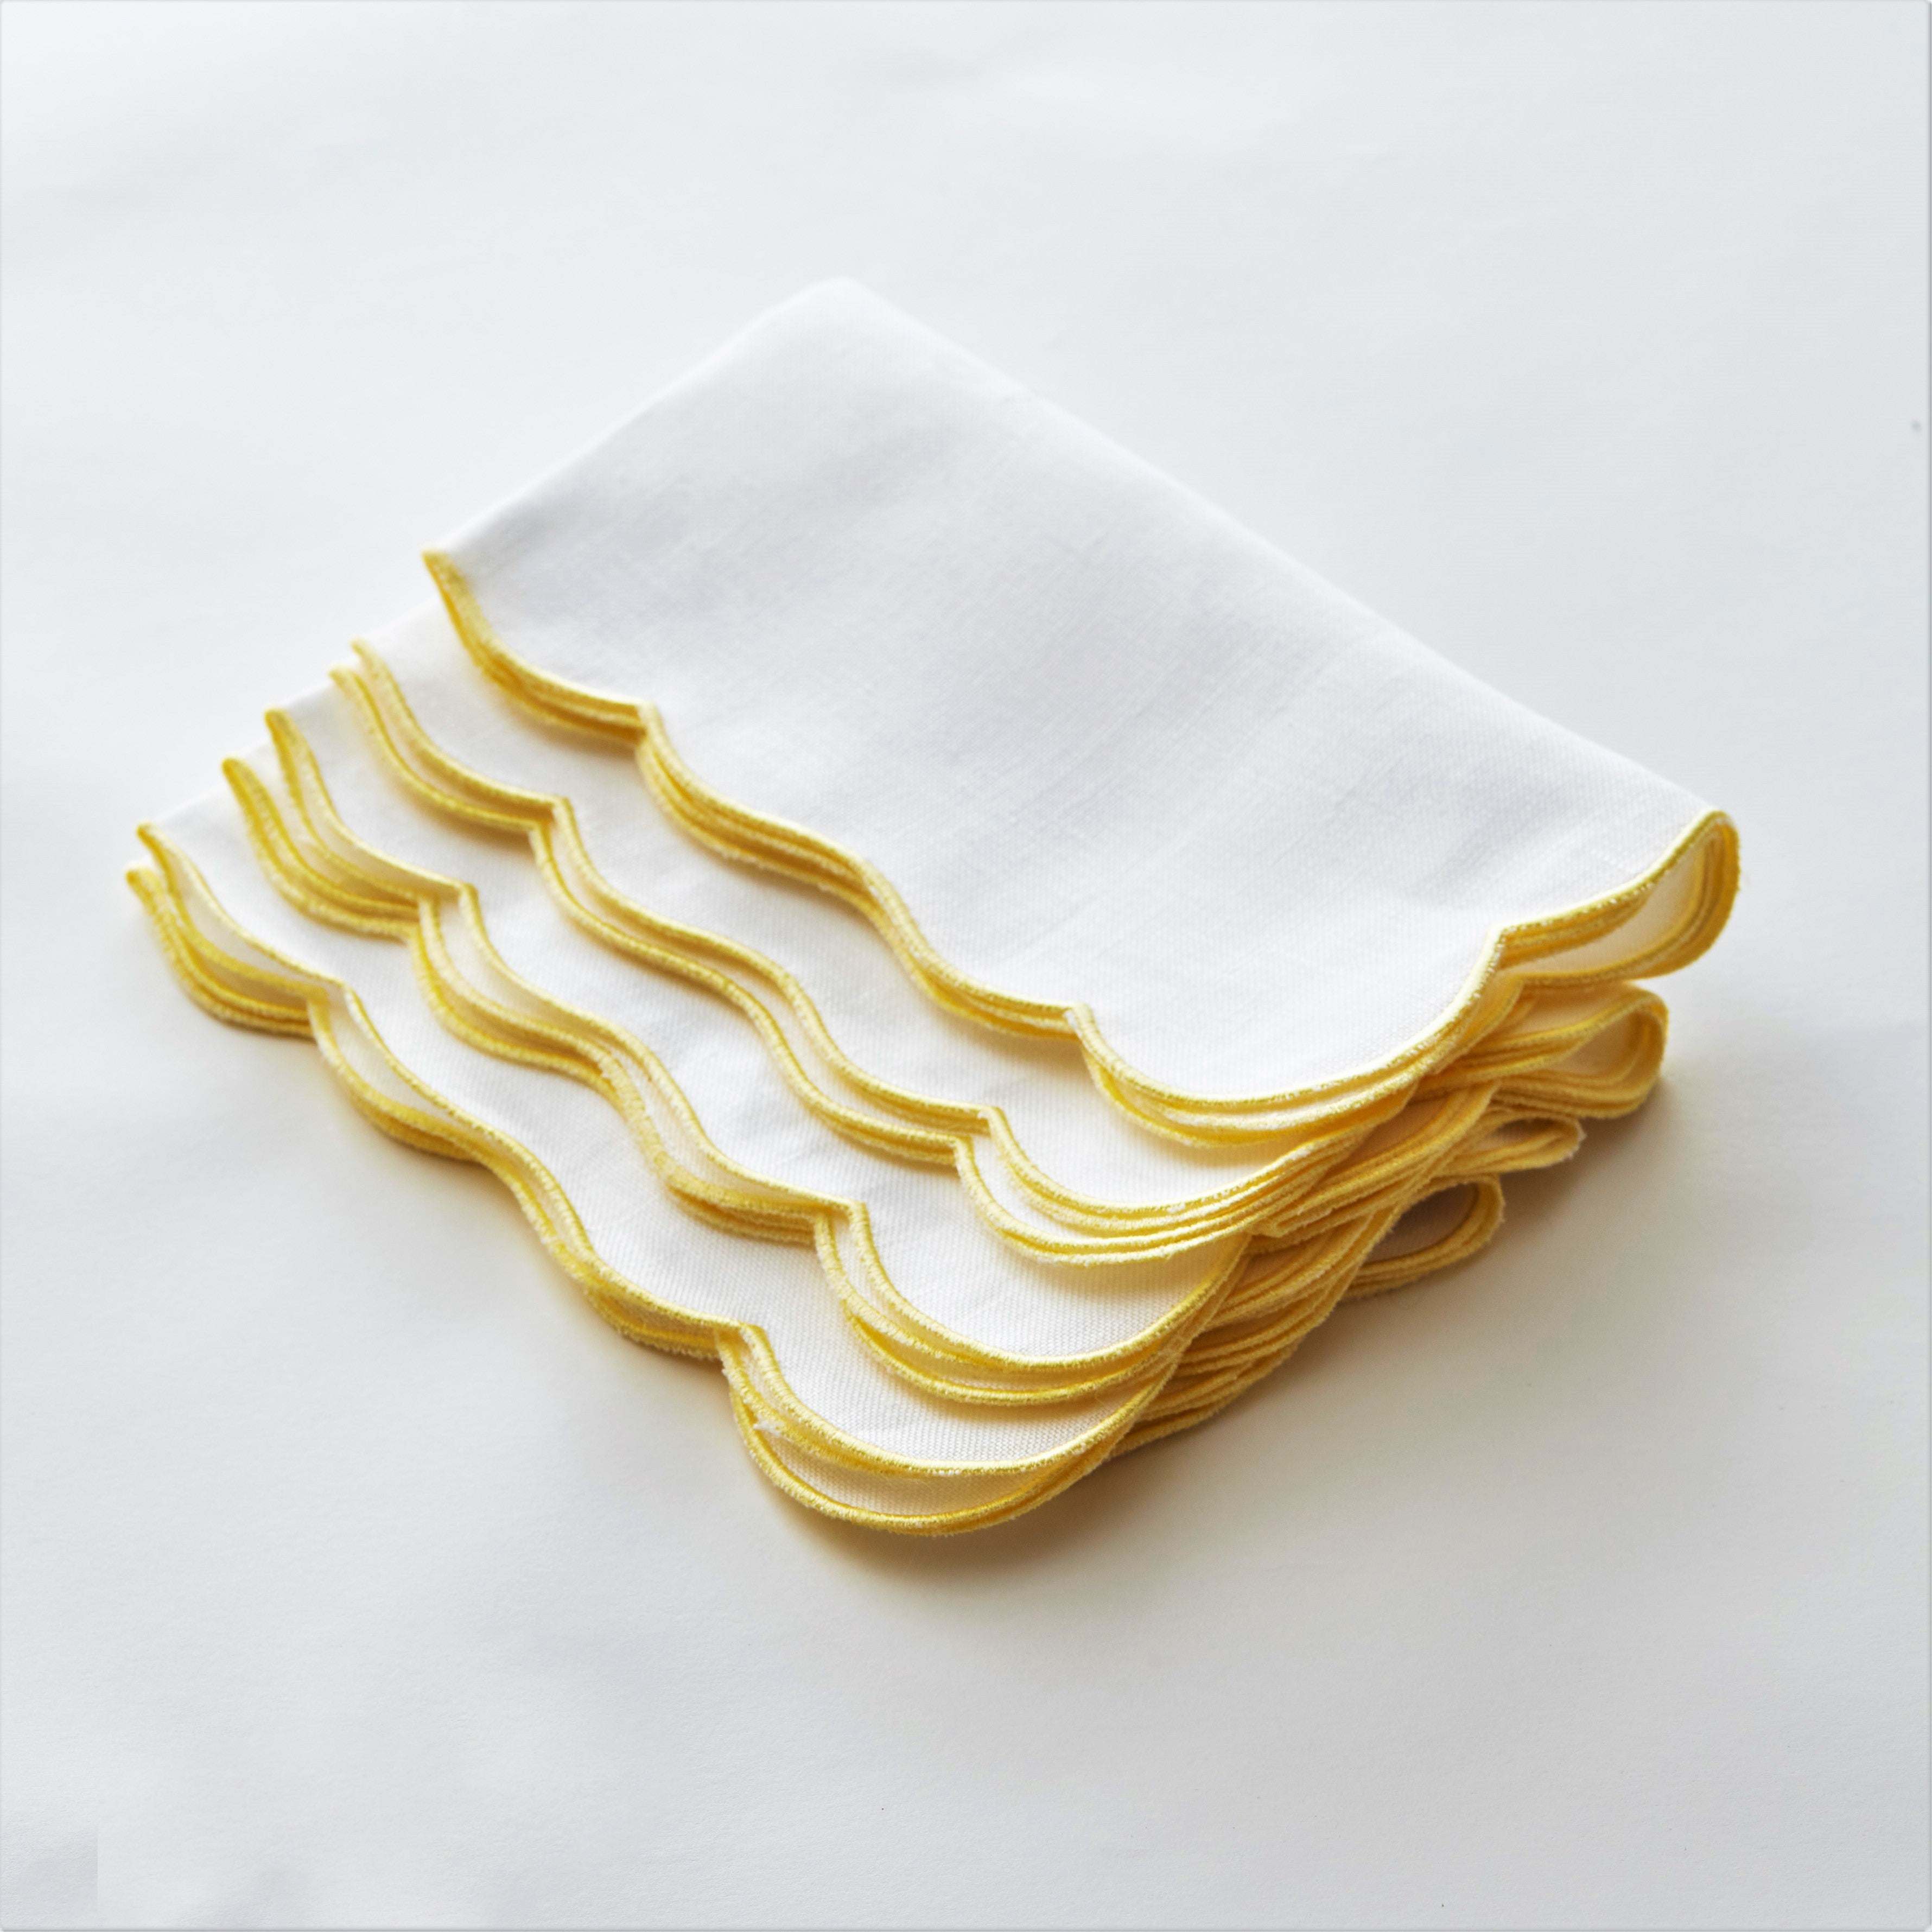 Embroidered Yellow Scallop Napkin (set of 4)